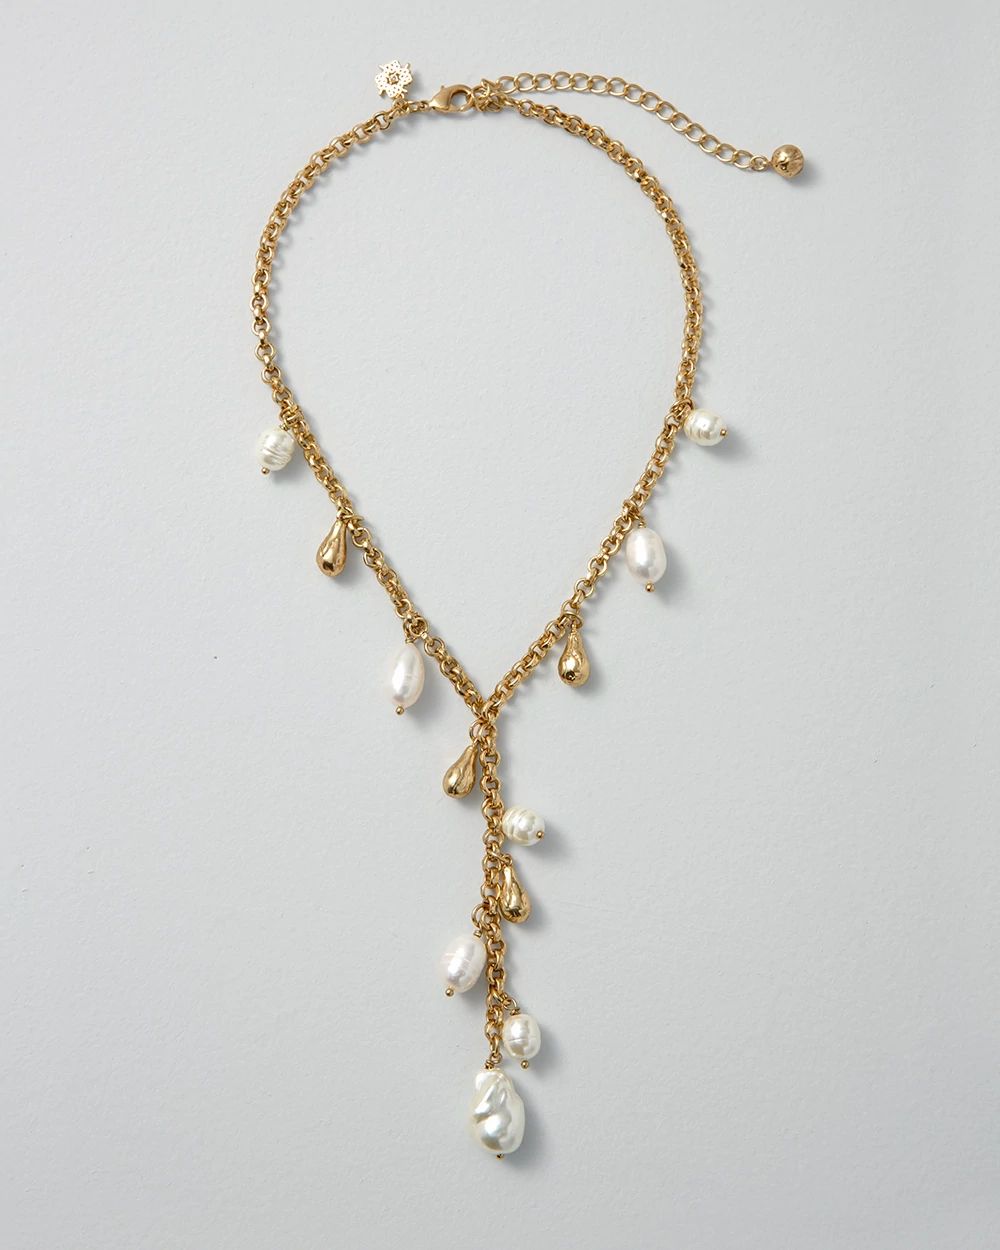 Freshwater Pearl & Goldtone Y Necklace click to view larger image.